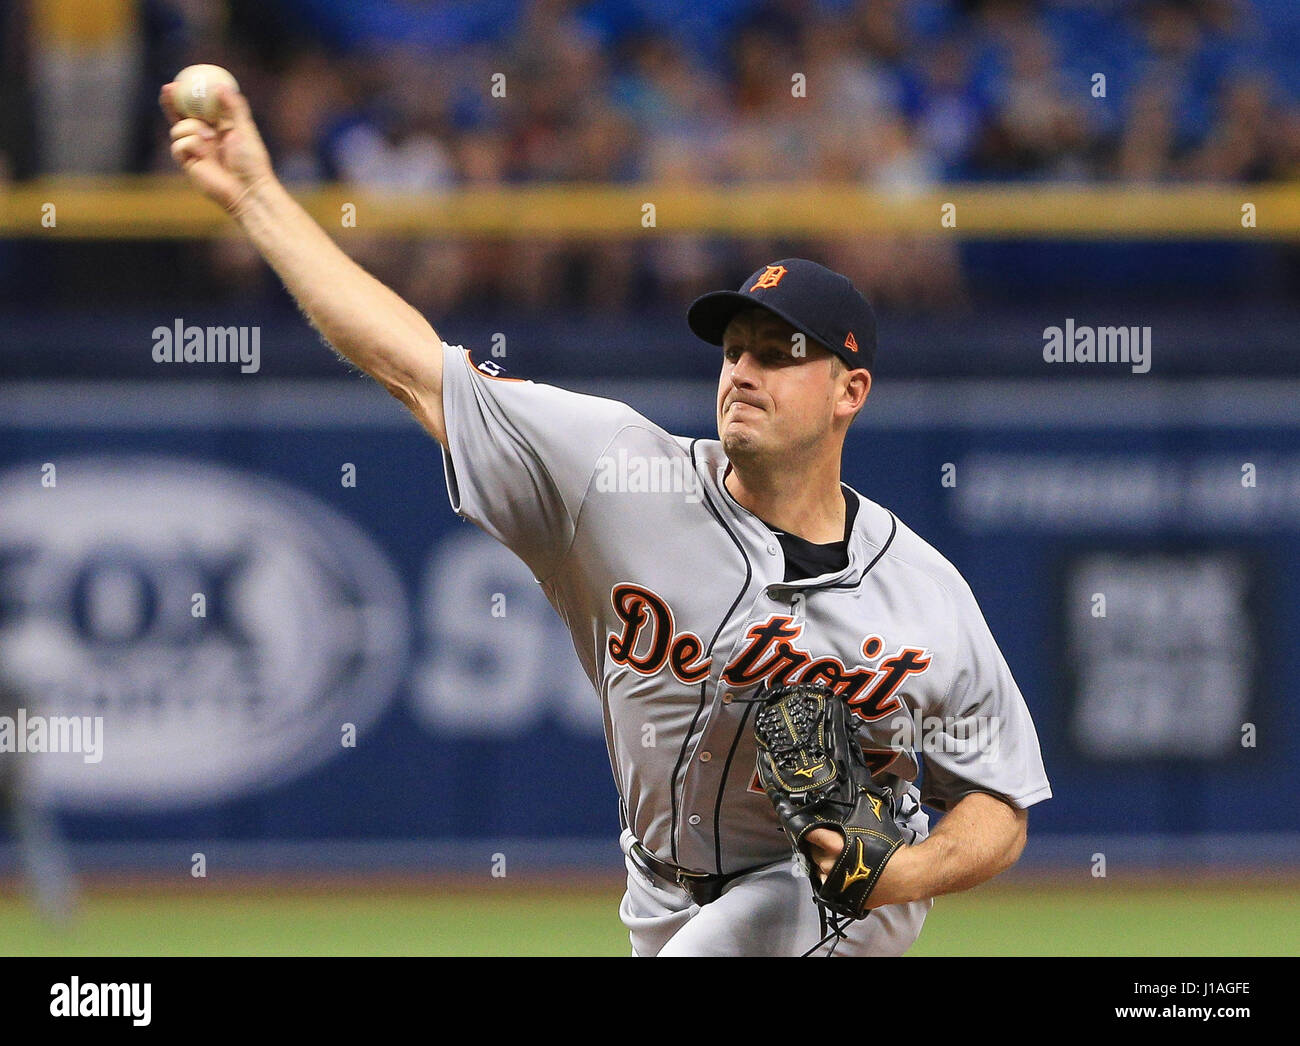 St. Petersburg, Florida, USA. 19th Apr, 2017. WILL VRAGOVIC | Times.Detroit Tigers starting pitcher Jordan Zimmermann (27) throwing in the first inning of the game between the Detroit Tigers and the Tampa Bay Rays at Tropicana Field in St. Petersburg, Fla. on Wednesday, April 19, 2017. Credit: Will Vragovic/Tampa Bay Times/ZUMA Wire/Alamy Live News Stock Photo